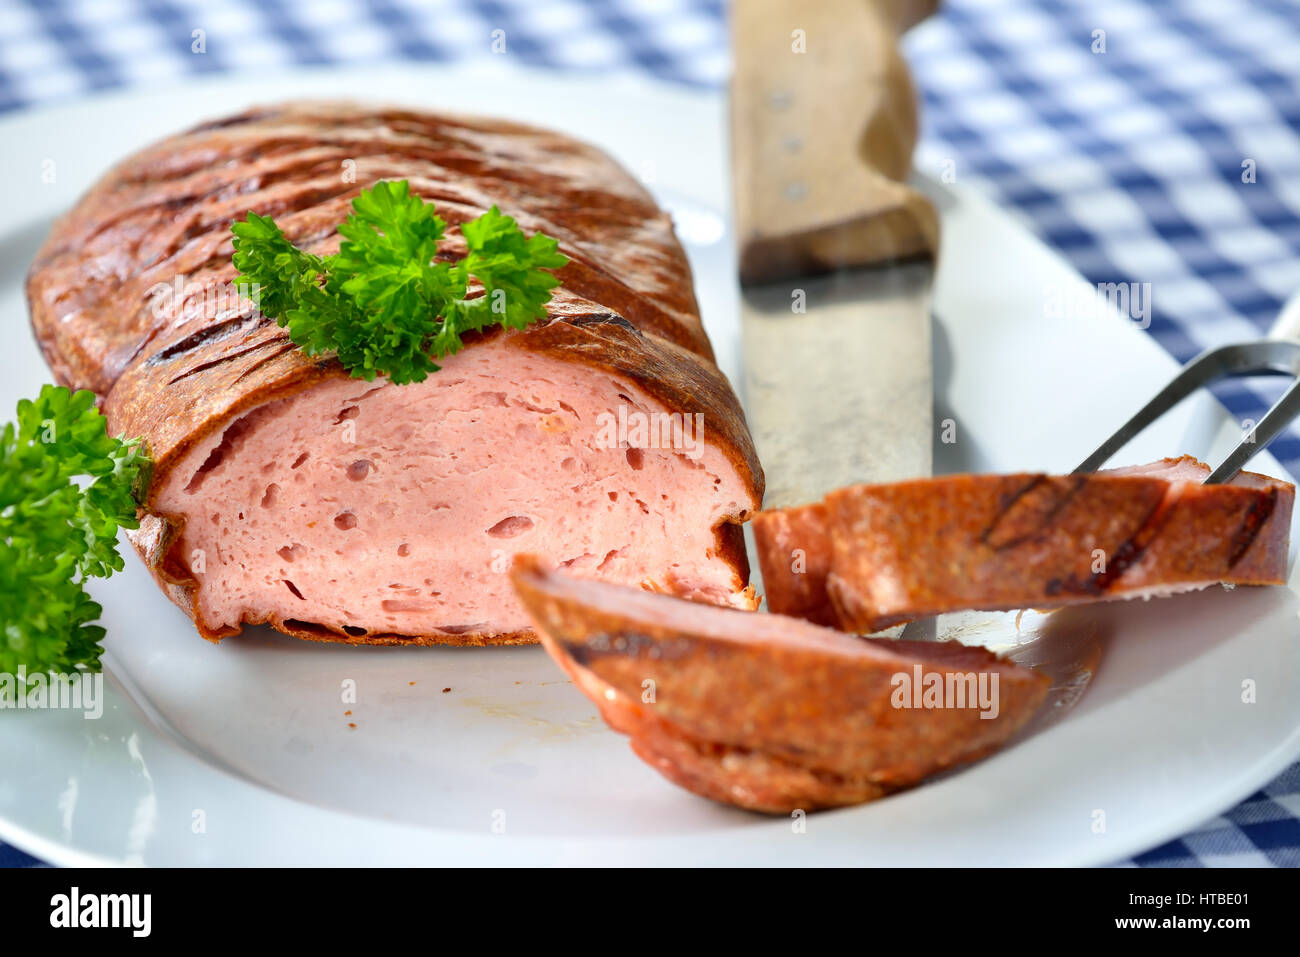 Bavarian meat loaf on a white plate served on a table with a white ...